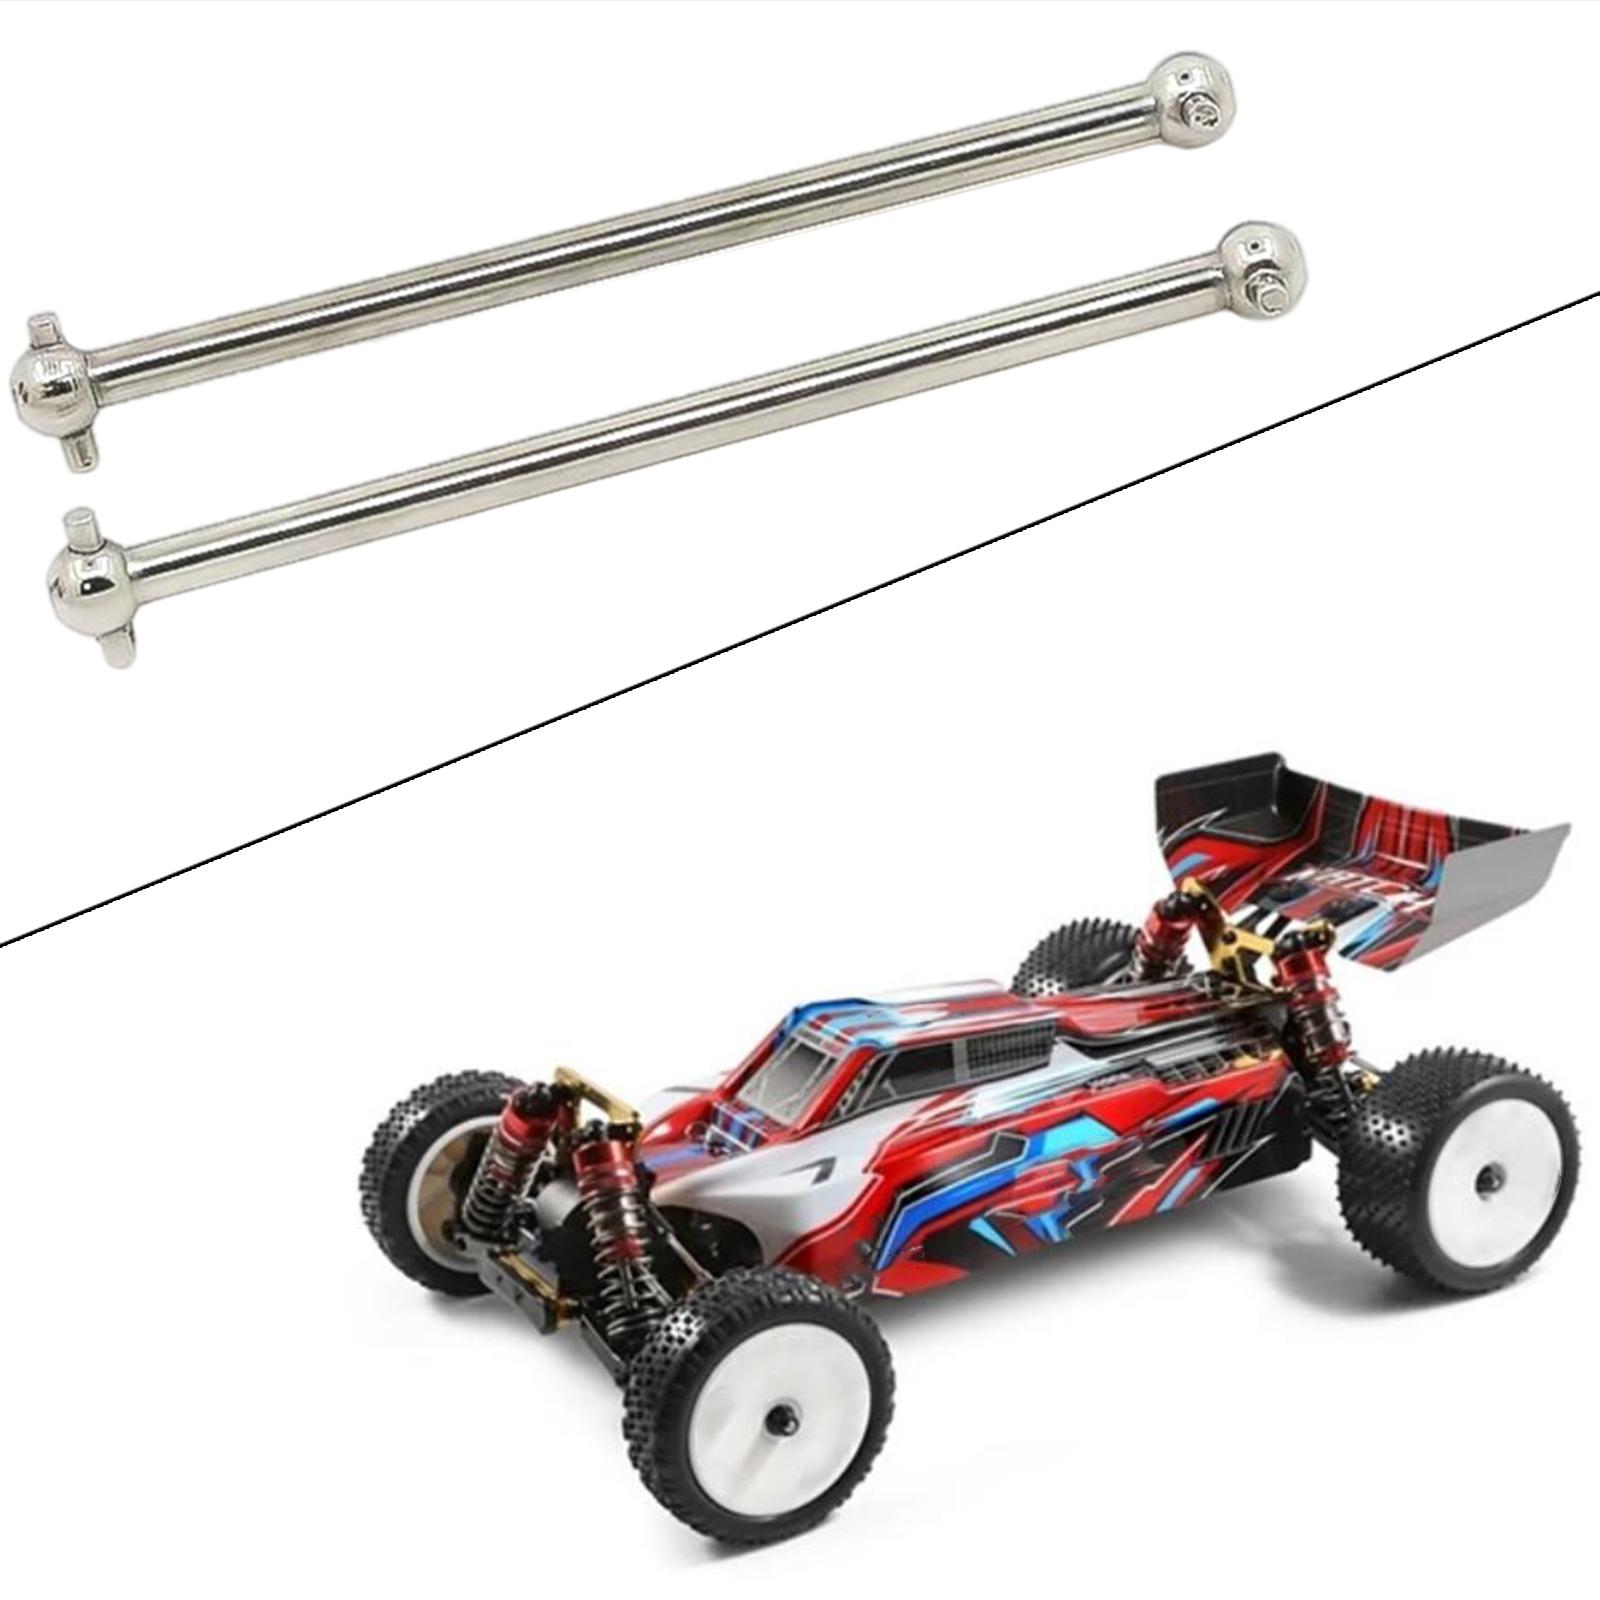 RC Drive Shaft RC Truck Parts for Wltoys 104001 1/10 Scale Model Car Truck